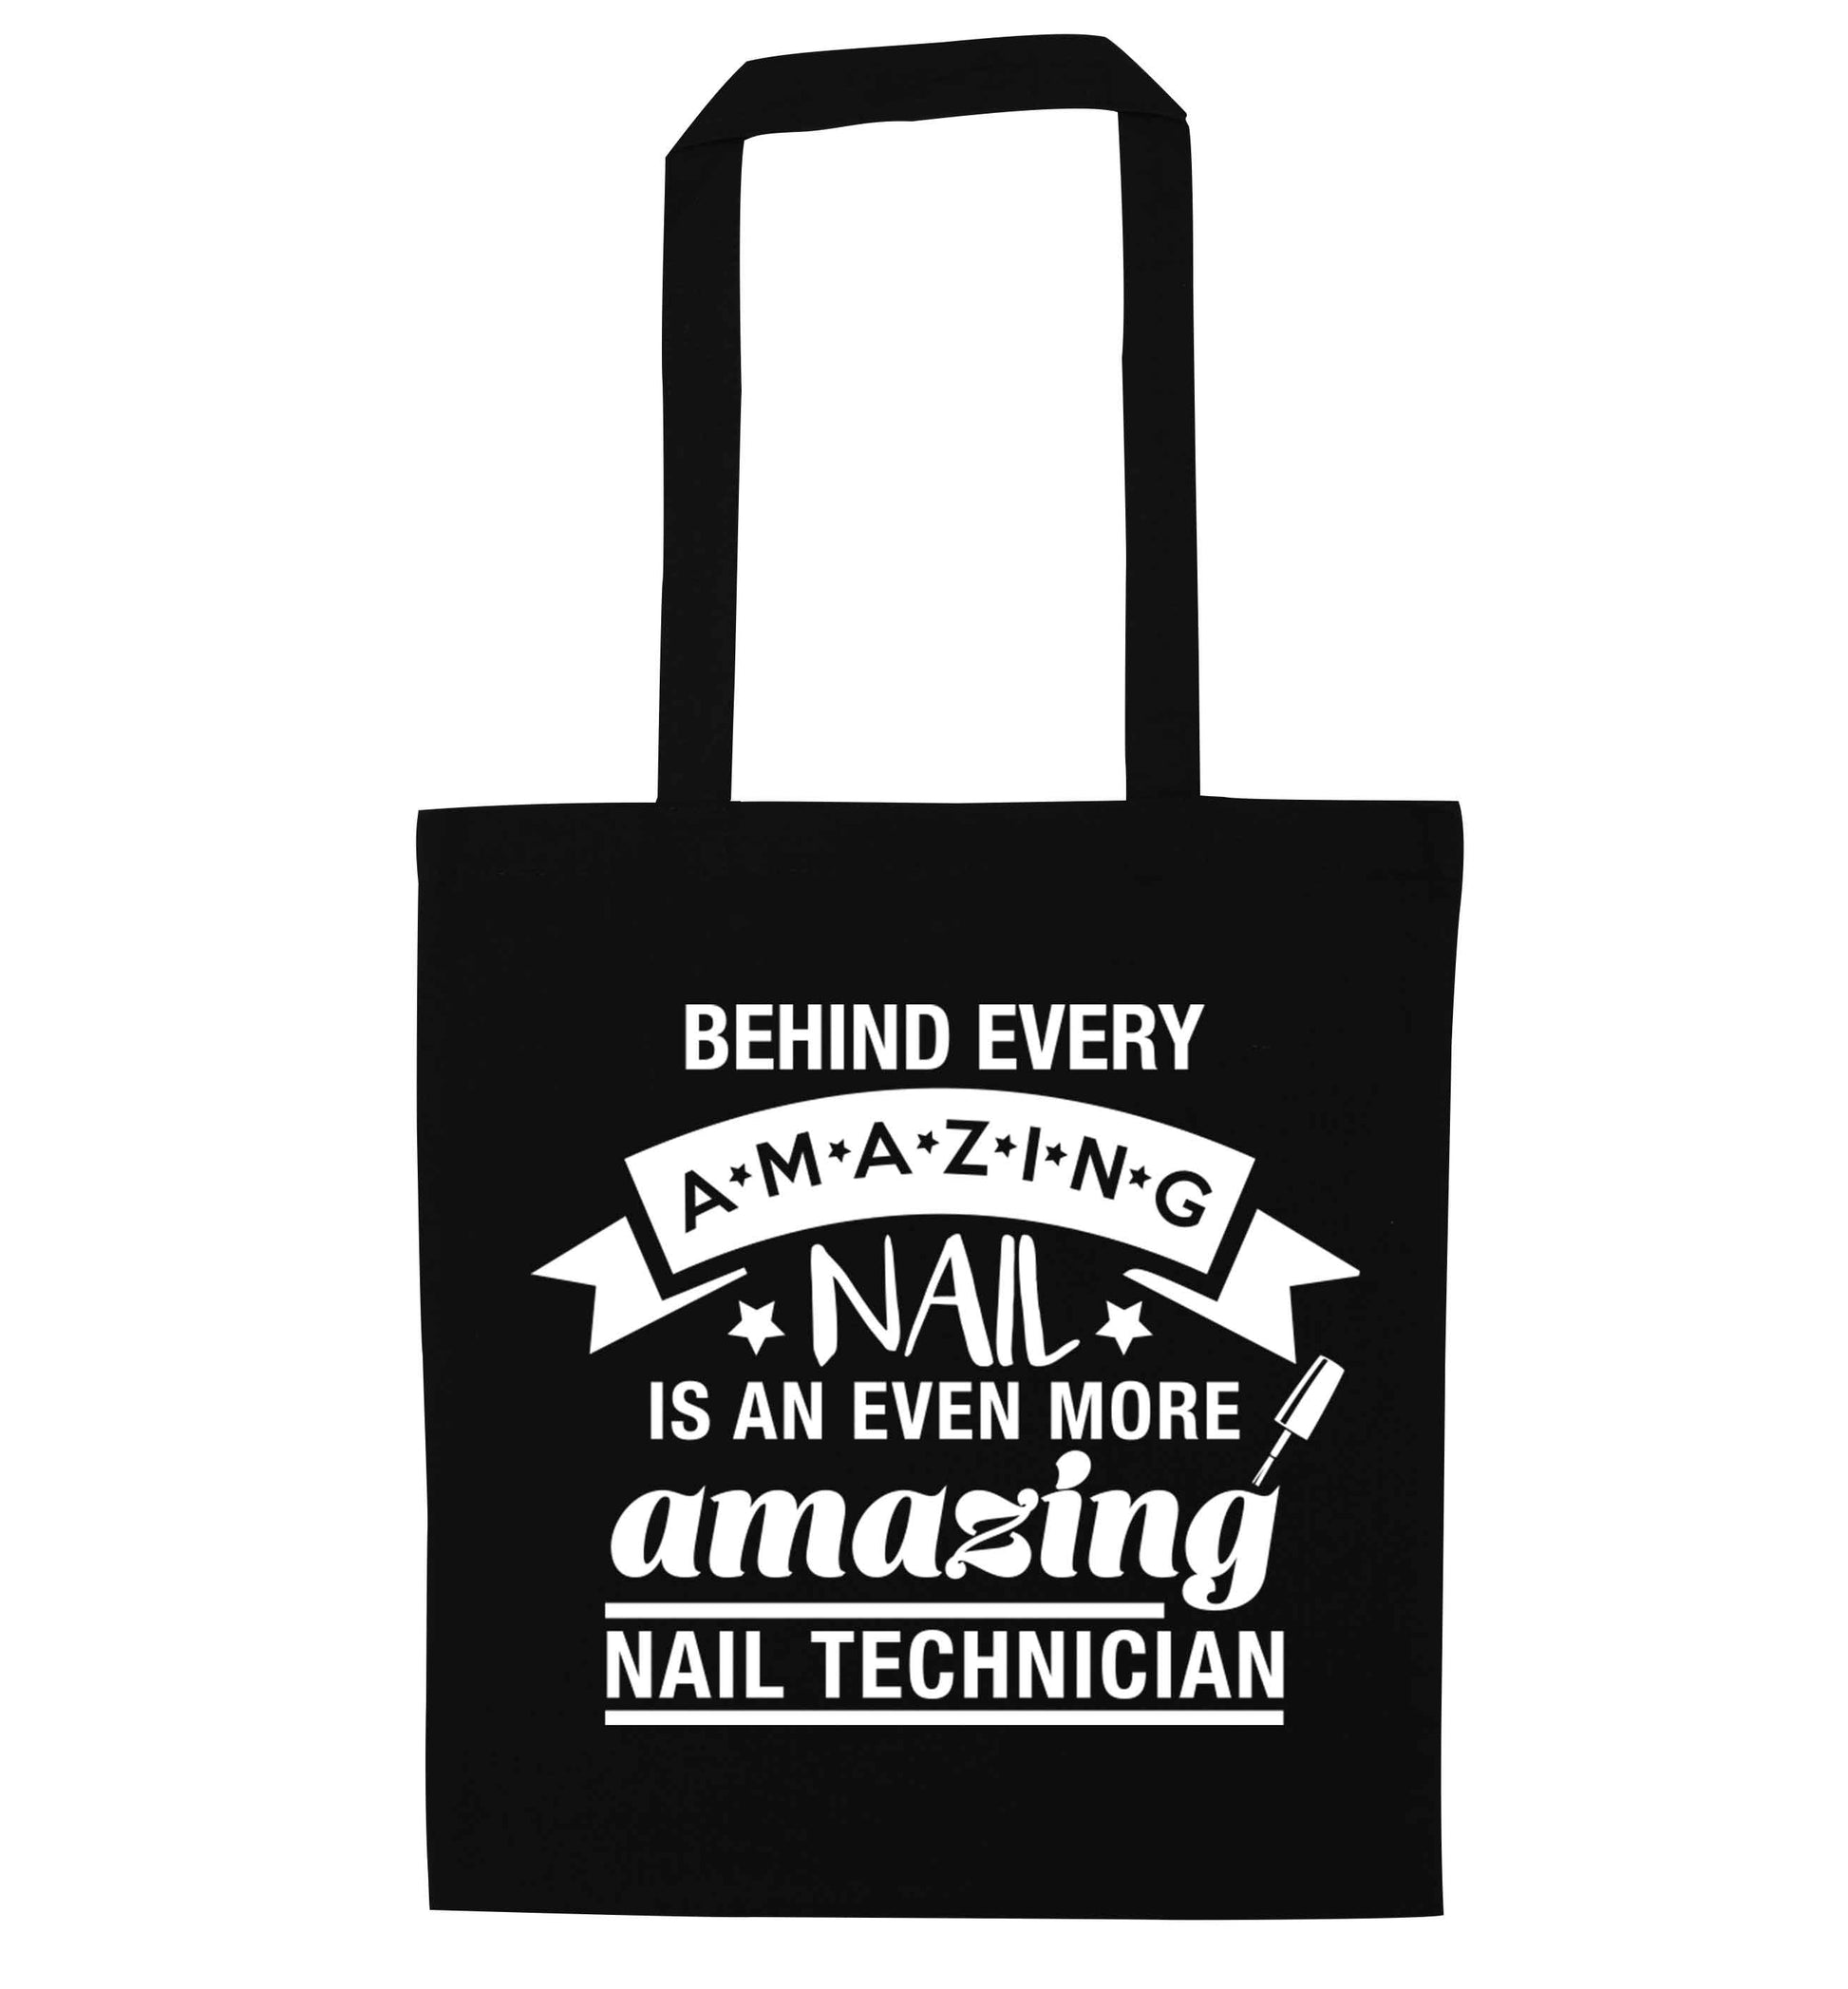 Behind every amazing nail is an even more amazing nail technician black tote bag